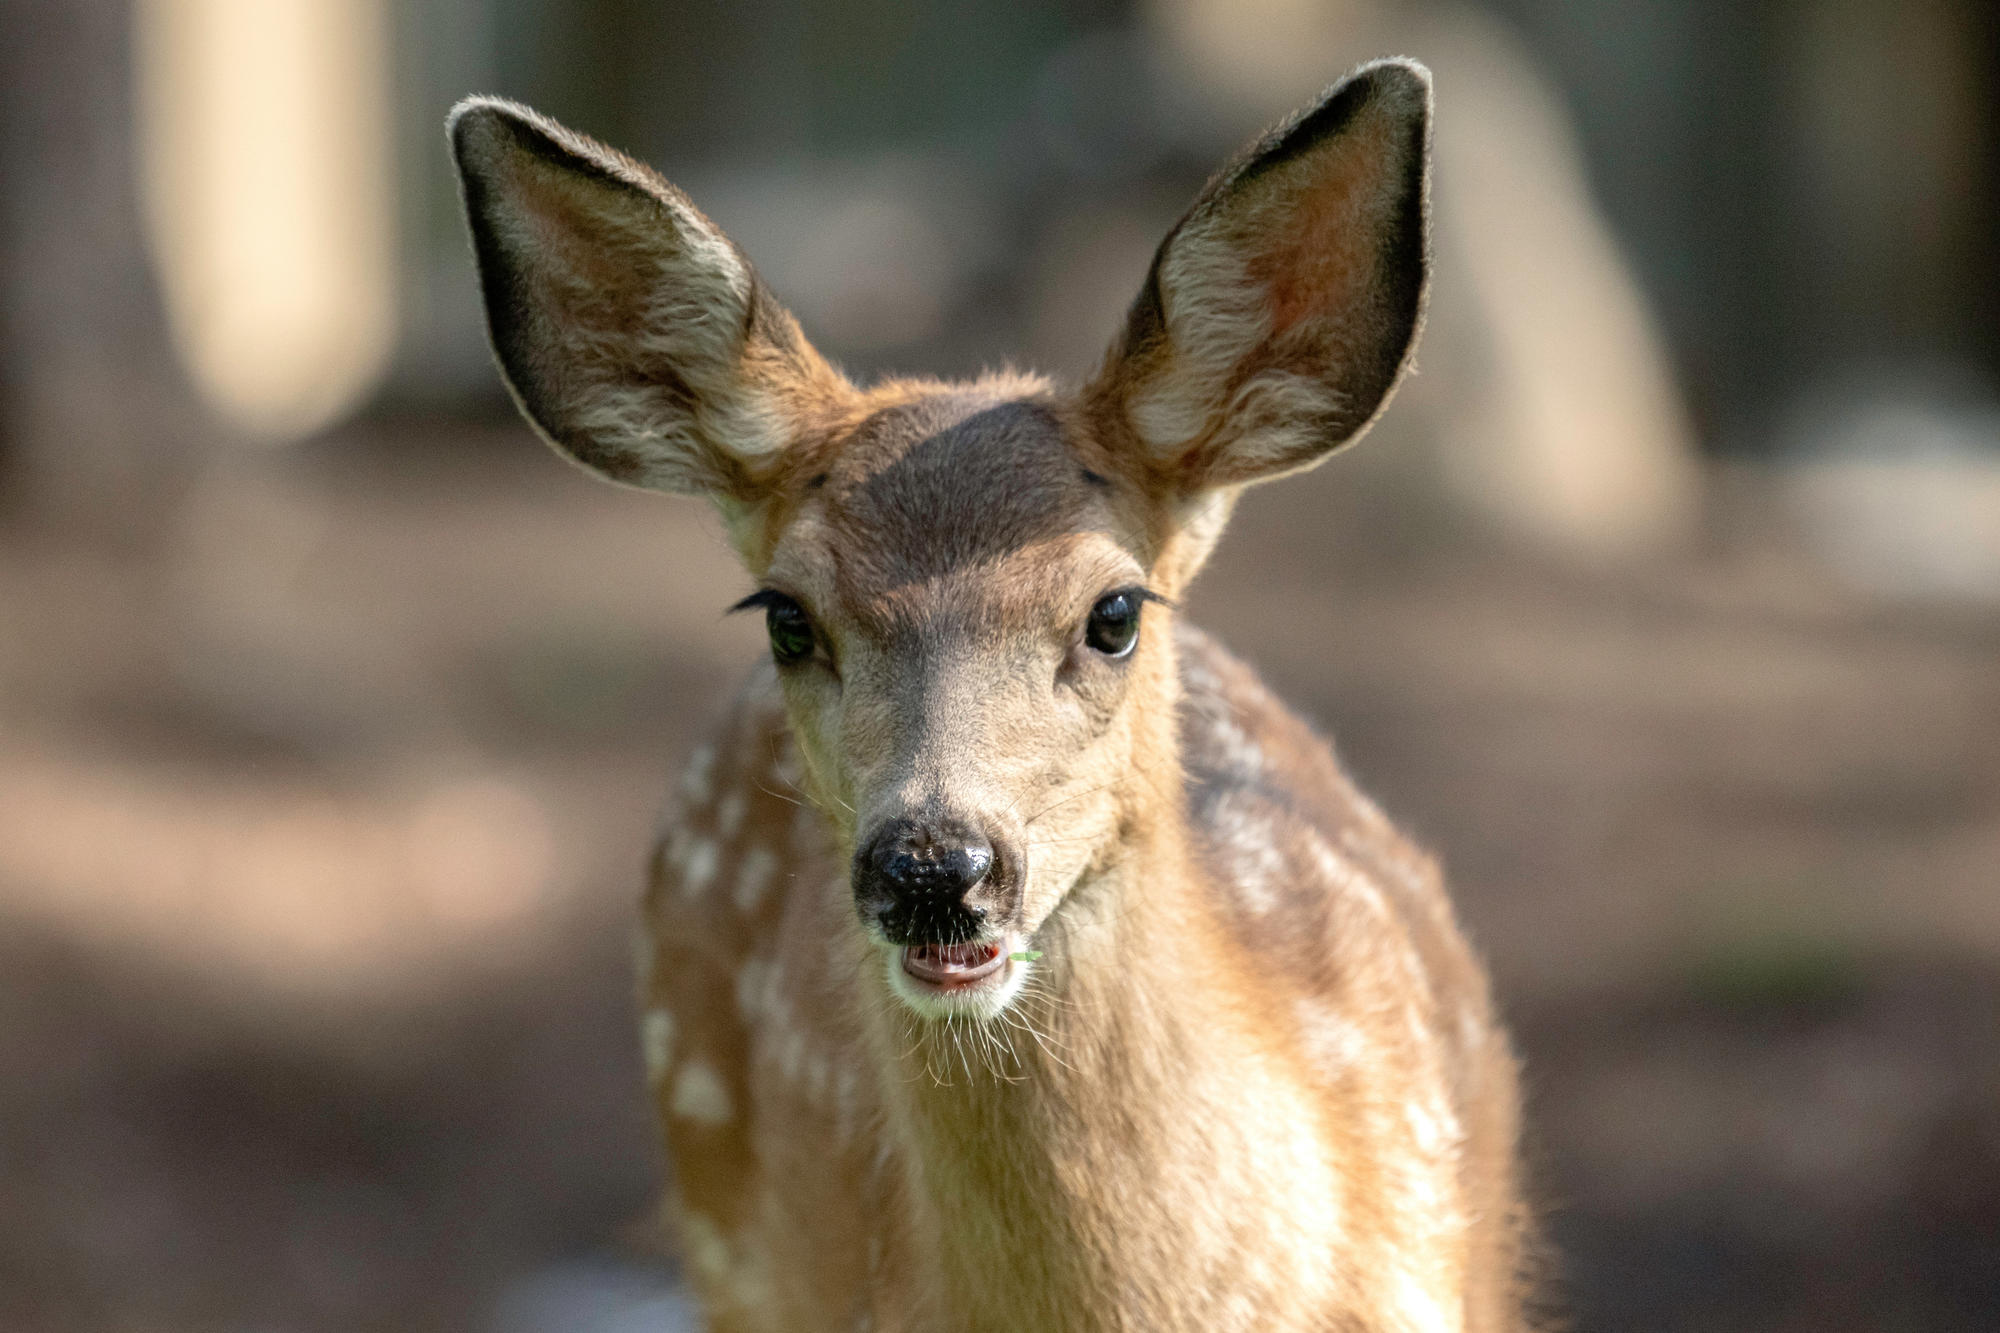 A fawn photographed in Sunriver, Oregon.